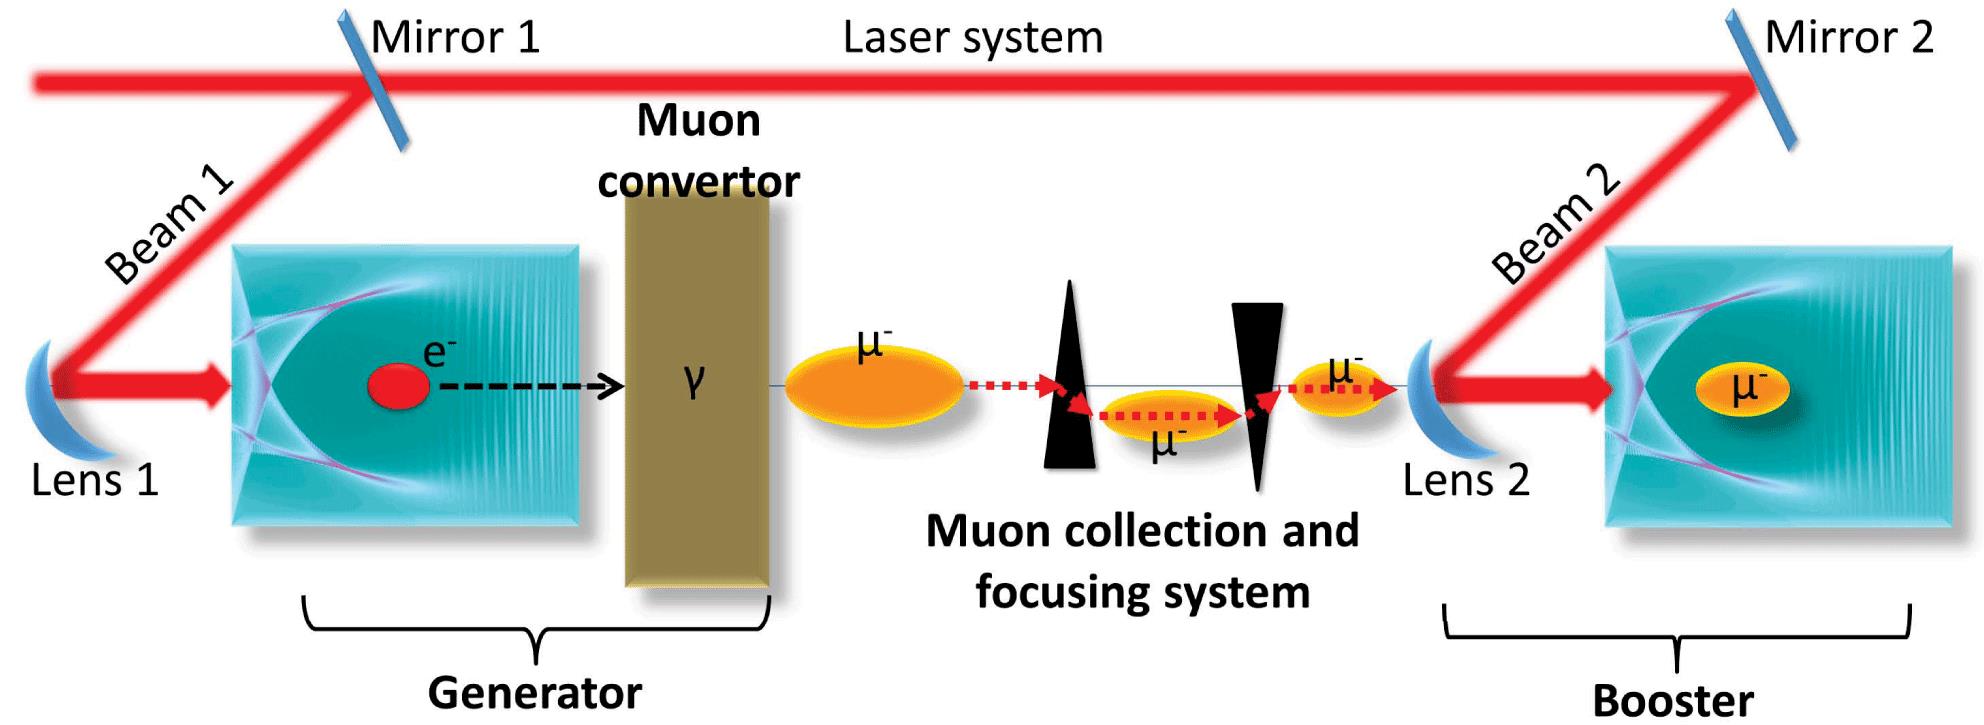 All-optical ‘Generator and Booster’ scheme of muon source. Muons are first generated by the Bethe–Heitler process, the ‘Generator’, via high-energy photons from Bremsstrahlung radiation of laser wakefield accelerated electrons interacting with highmaterials. After a proper collection and focusing system, muons are boosted by another laser wakefield, the ‘Booster’.